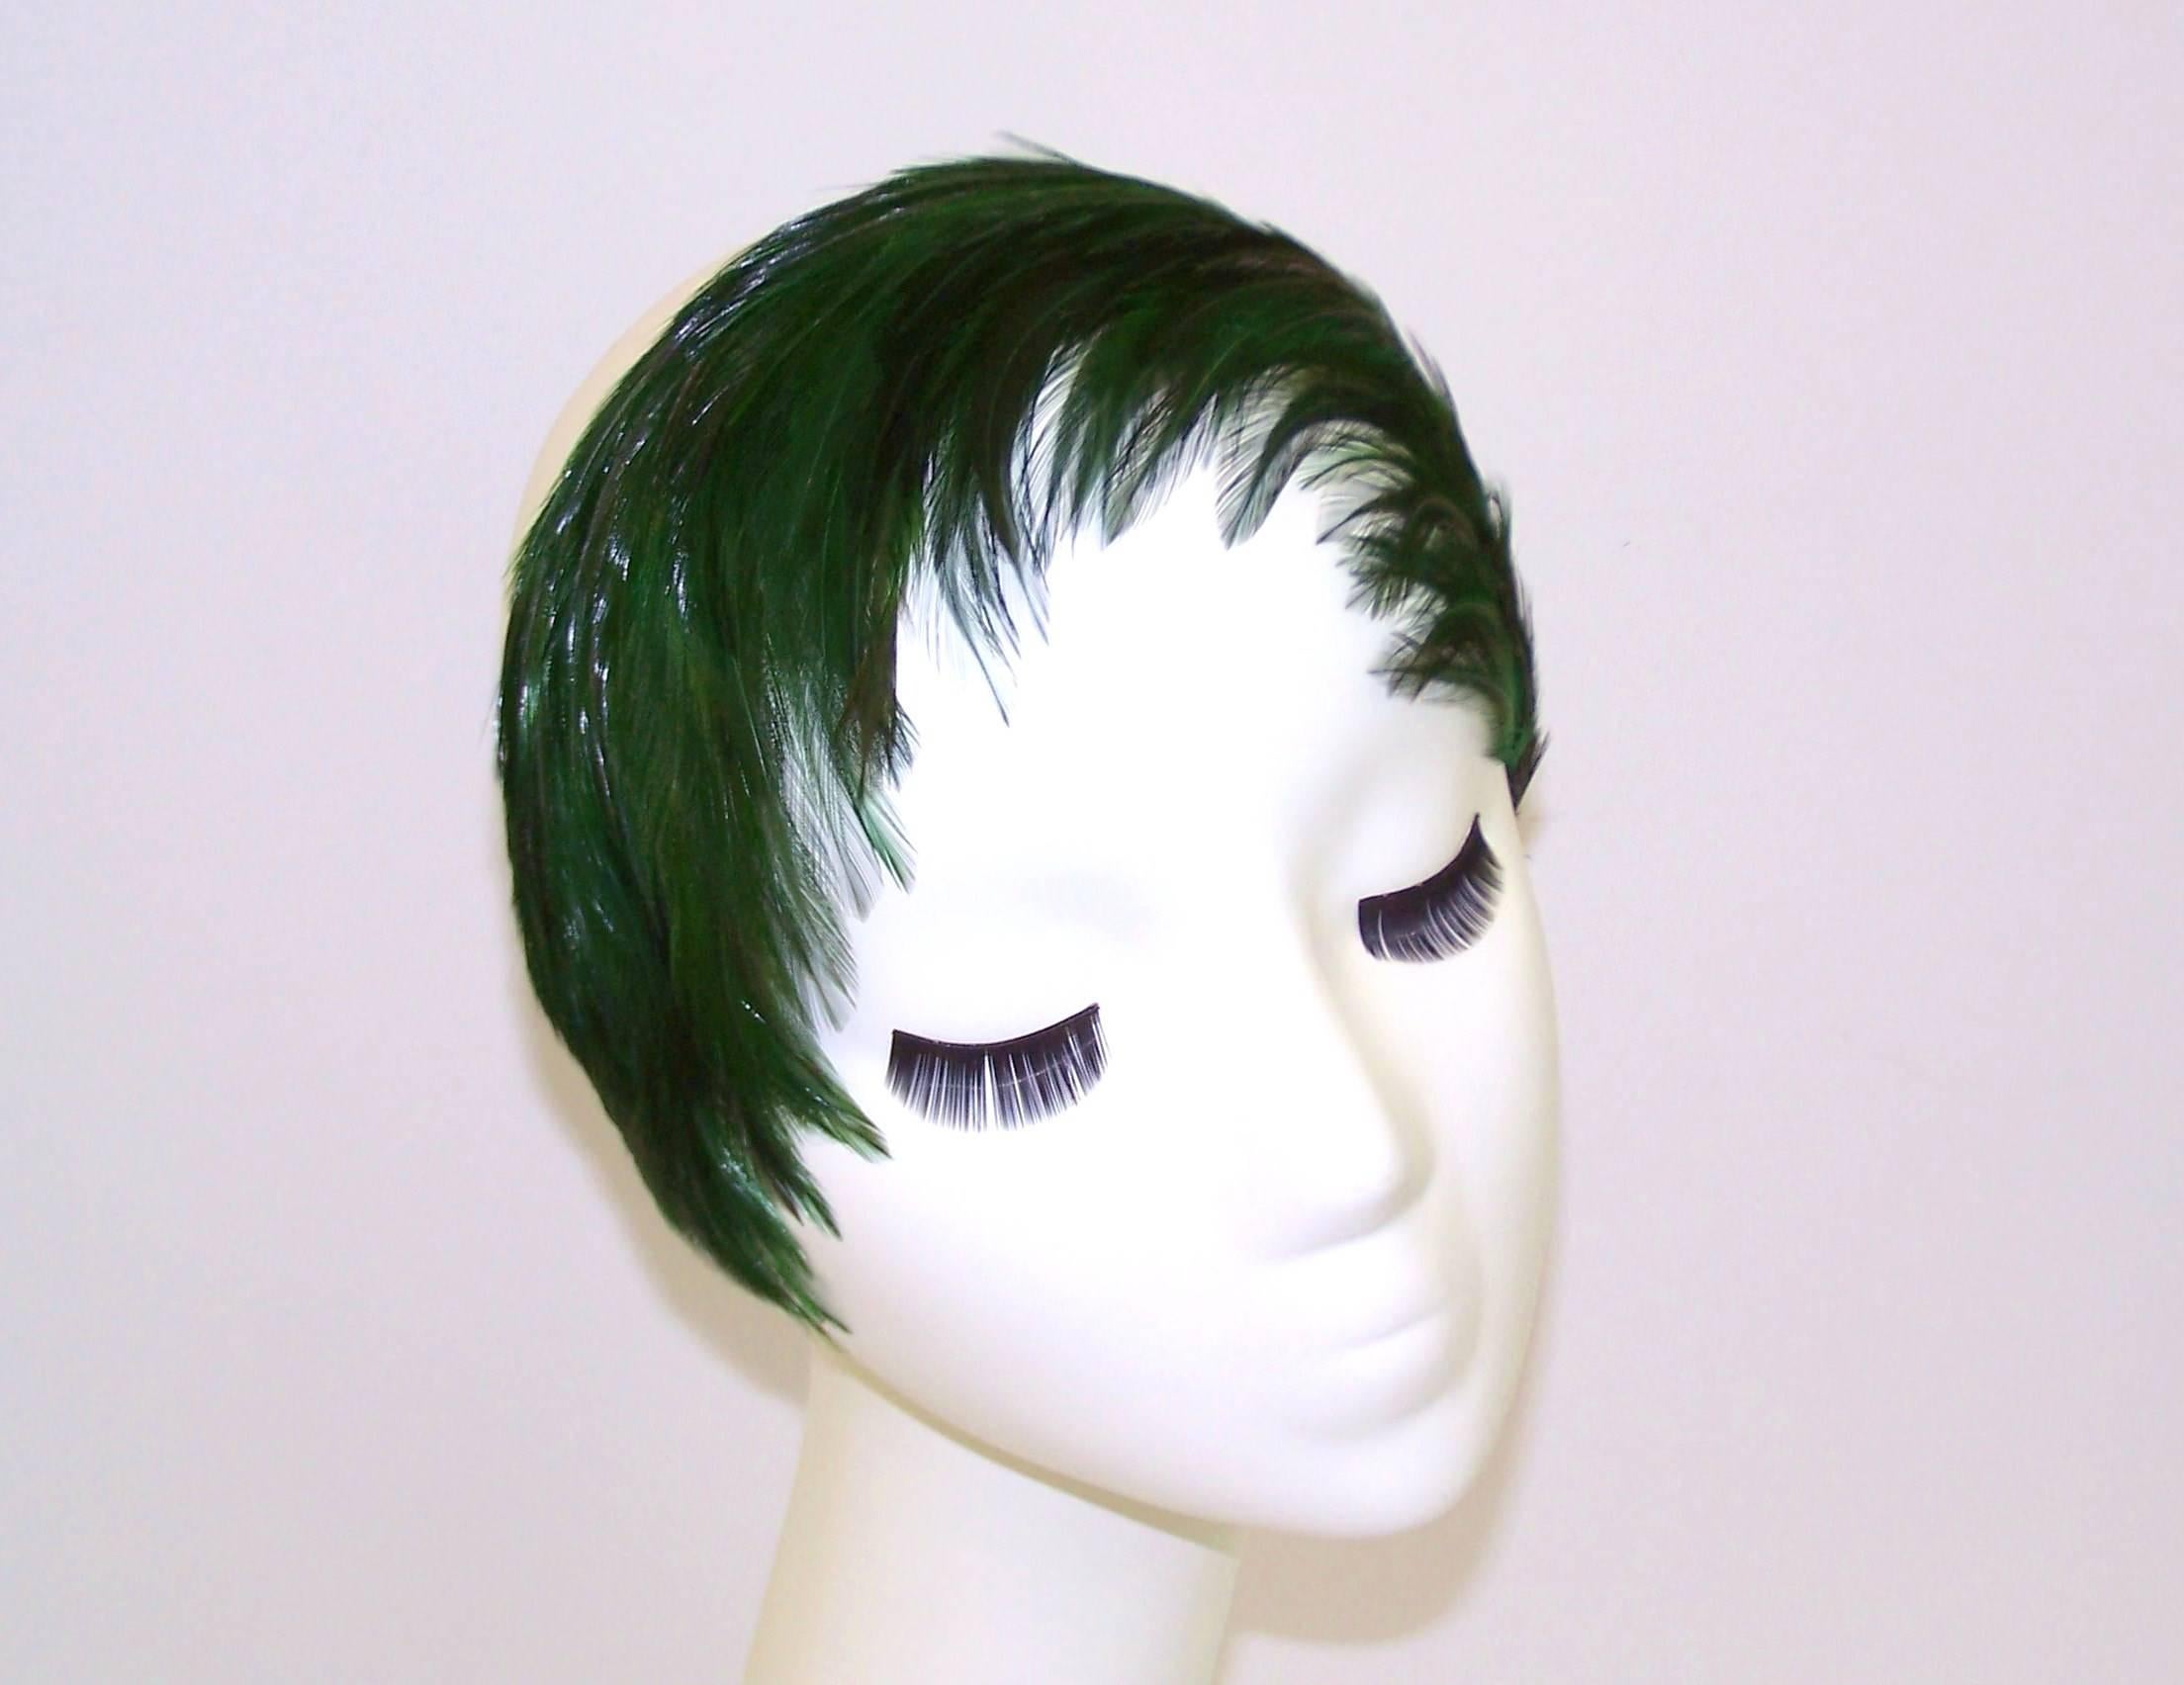 Don this headband for instant emerald green feather bangs!  The look is so versatile...wear it backwards, forwards, pushed up or back...for an instant touch of chic.  The grosgrain covered headband fits many sizes and can even be worn as a collar